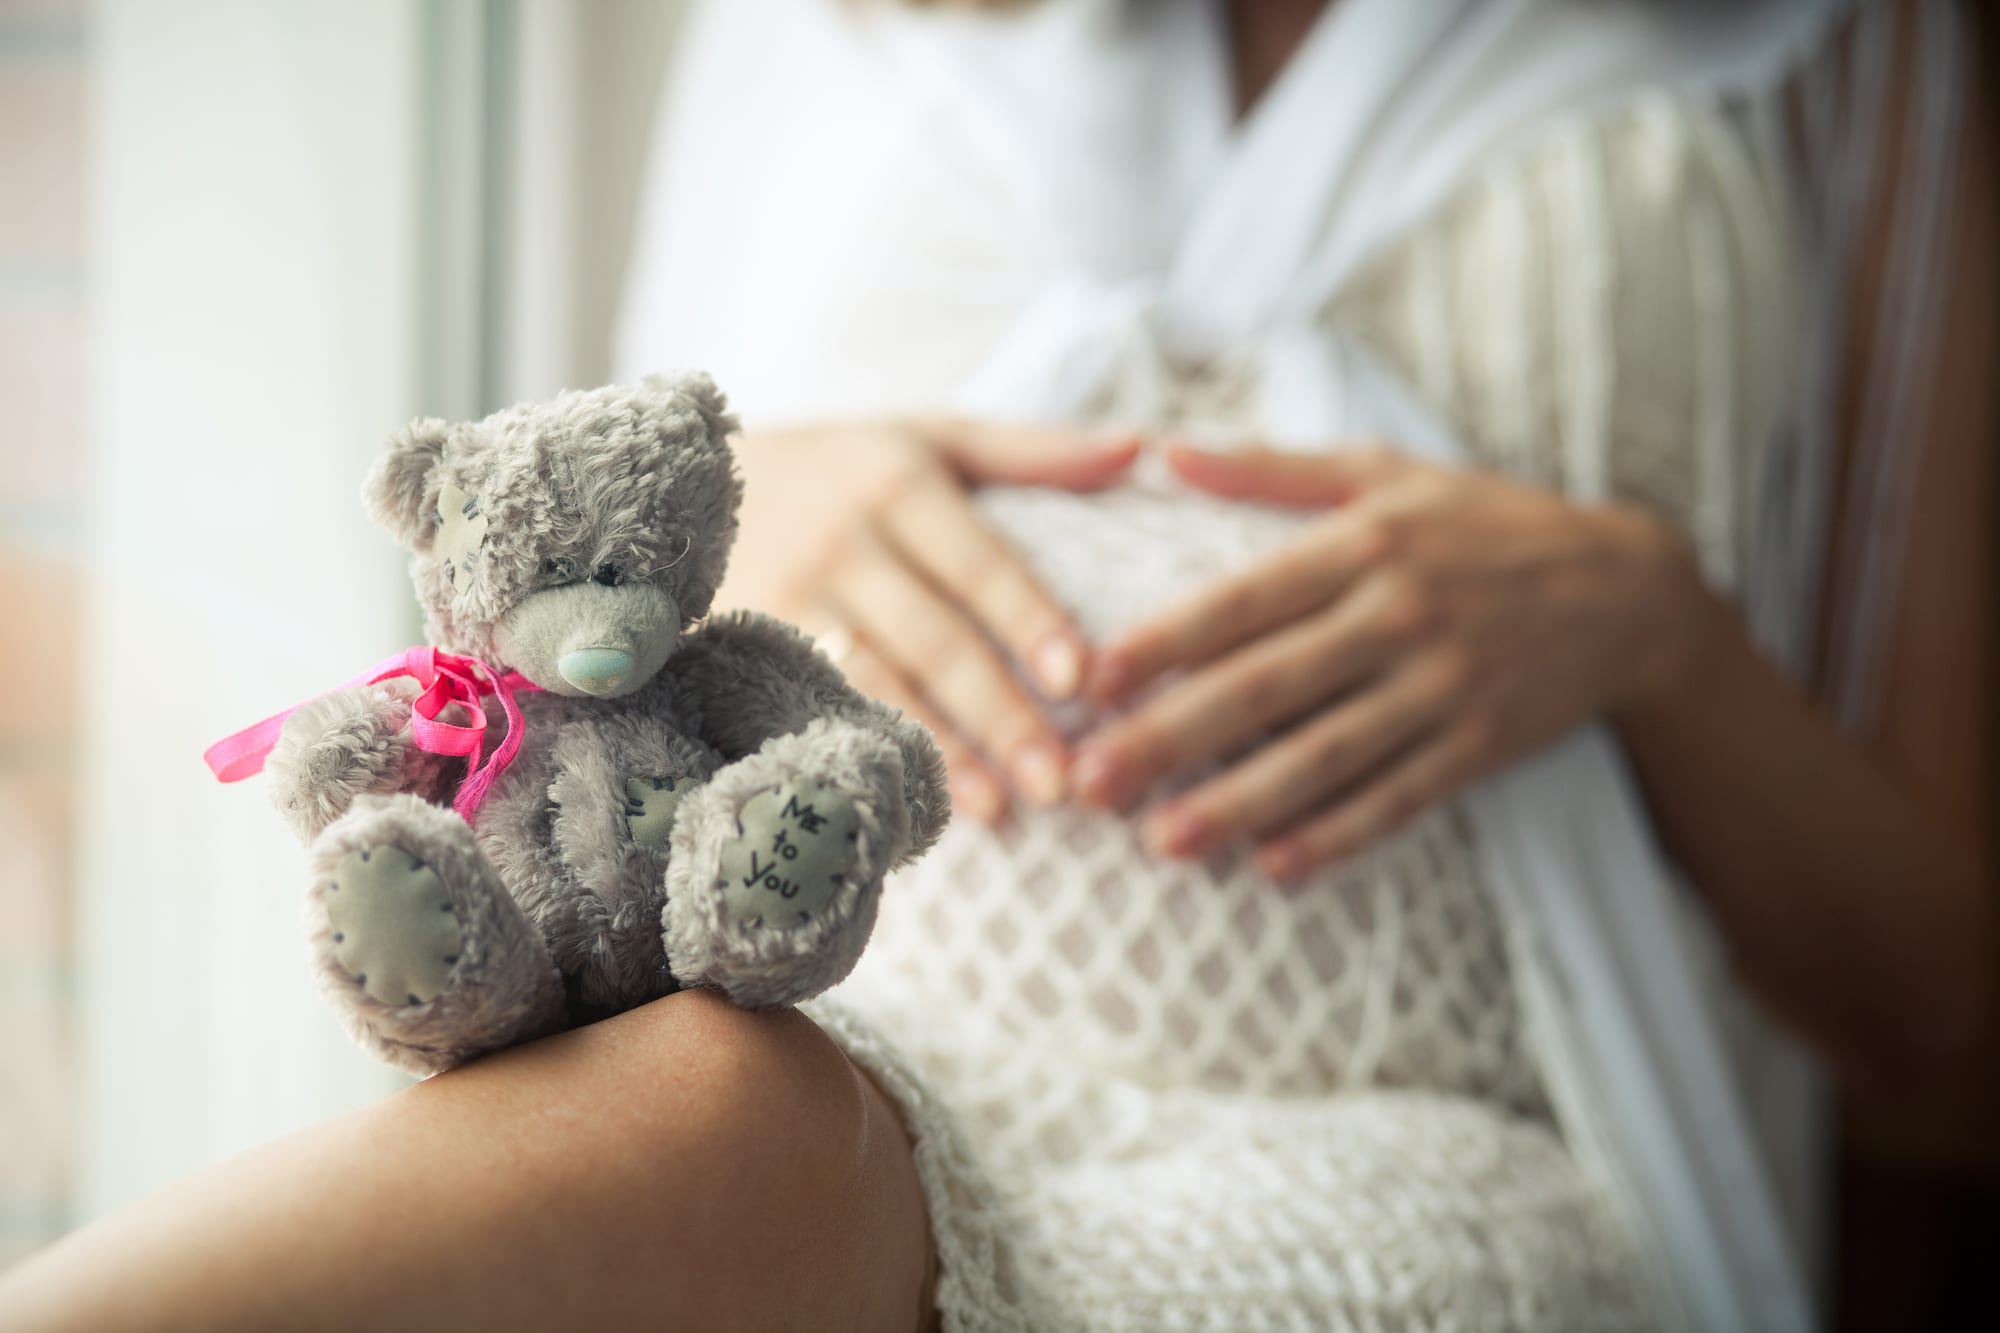 6 positive reasons pregnancy is so special #pregnancytips #pregnancy #impregnant